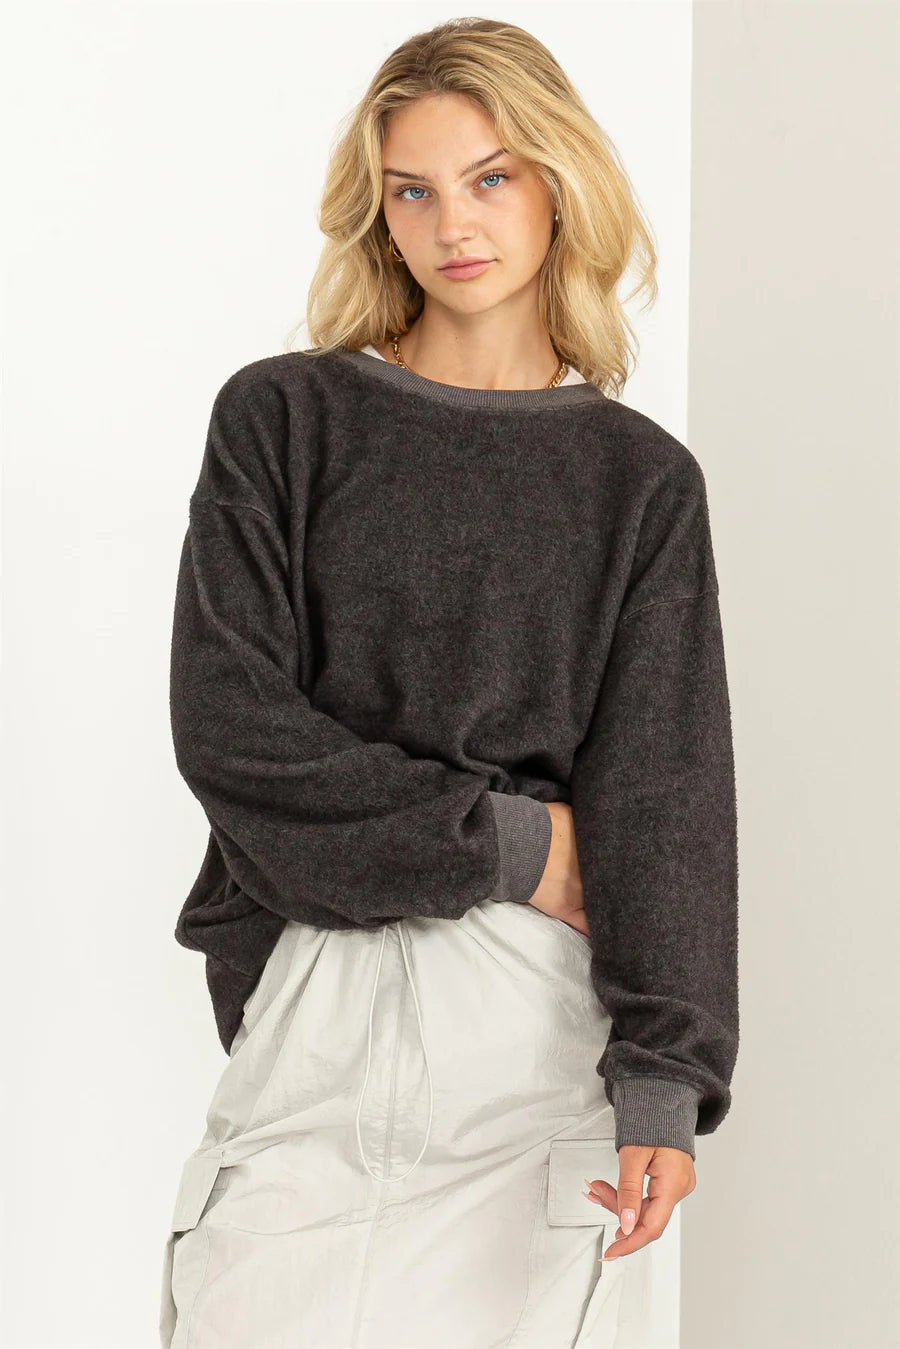 The Special Place Oversized Top